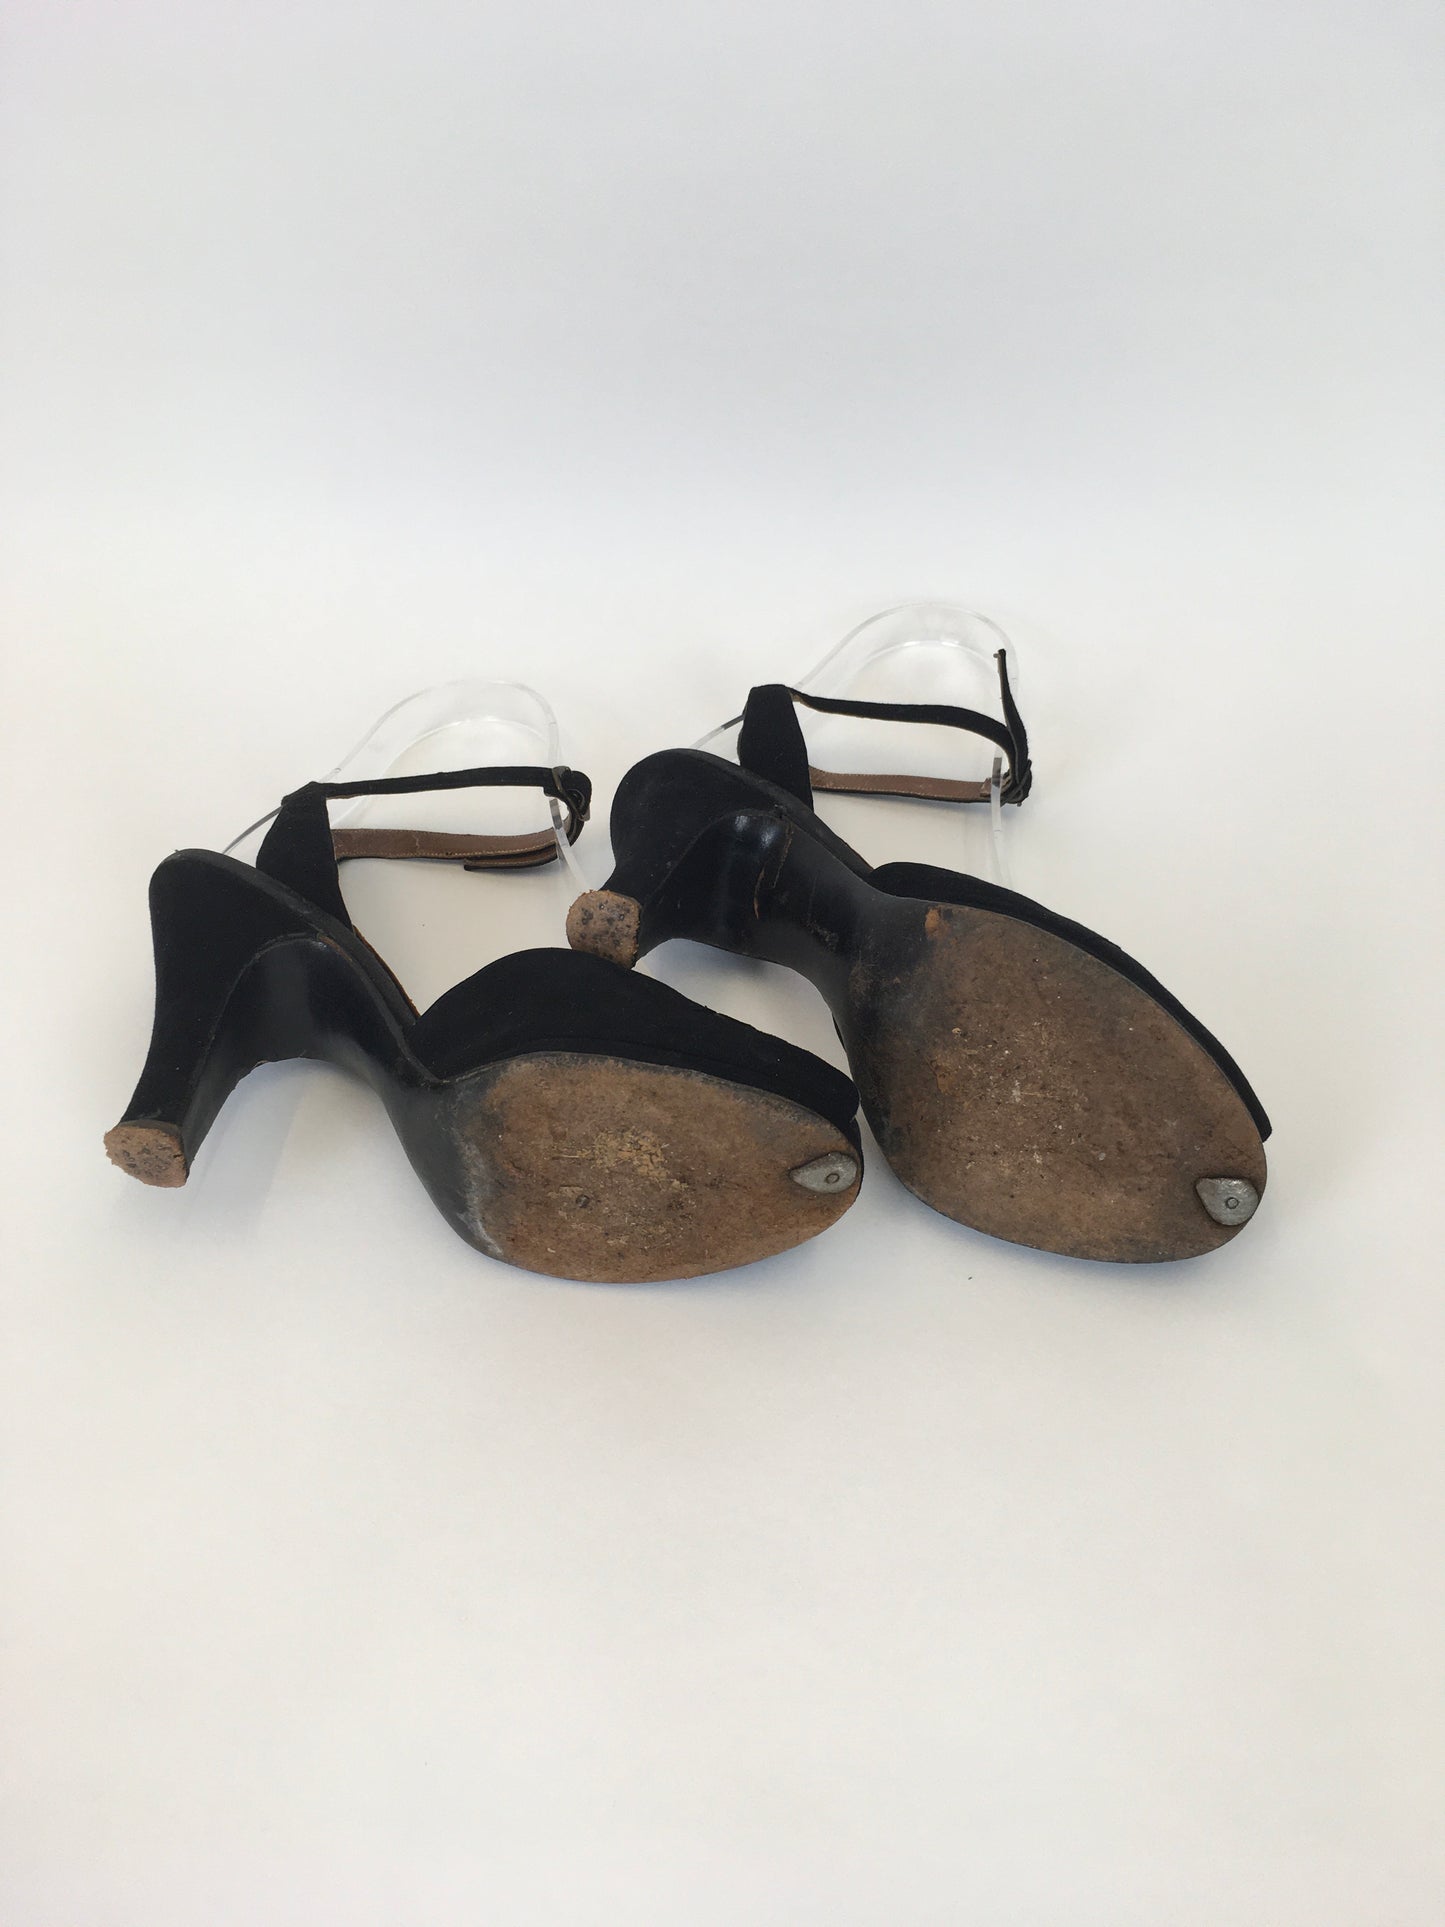 Original 1940s Black Suede Heels - With Peep toe Front Detailing and Buckled Ankle Strap